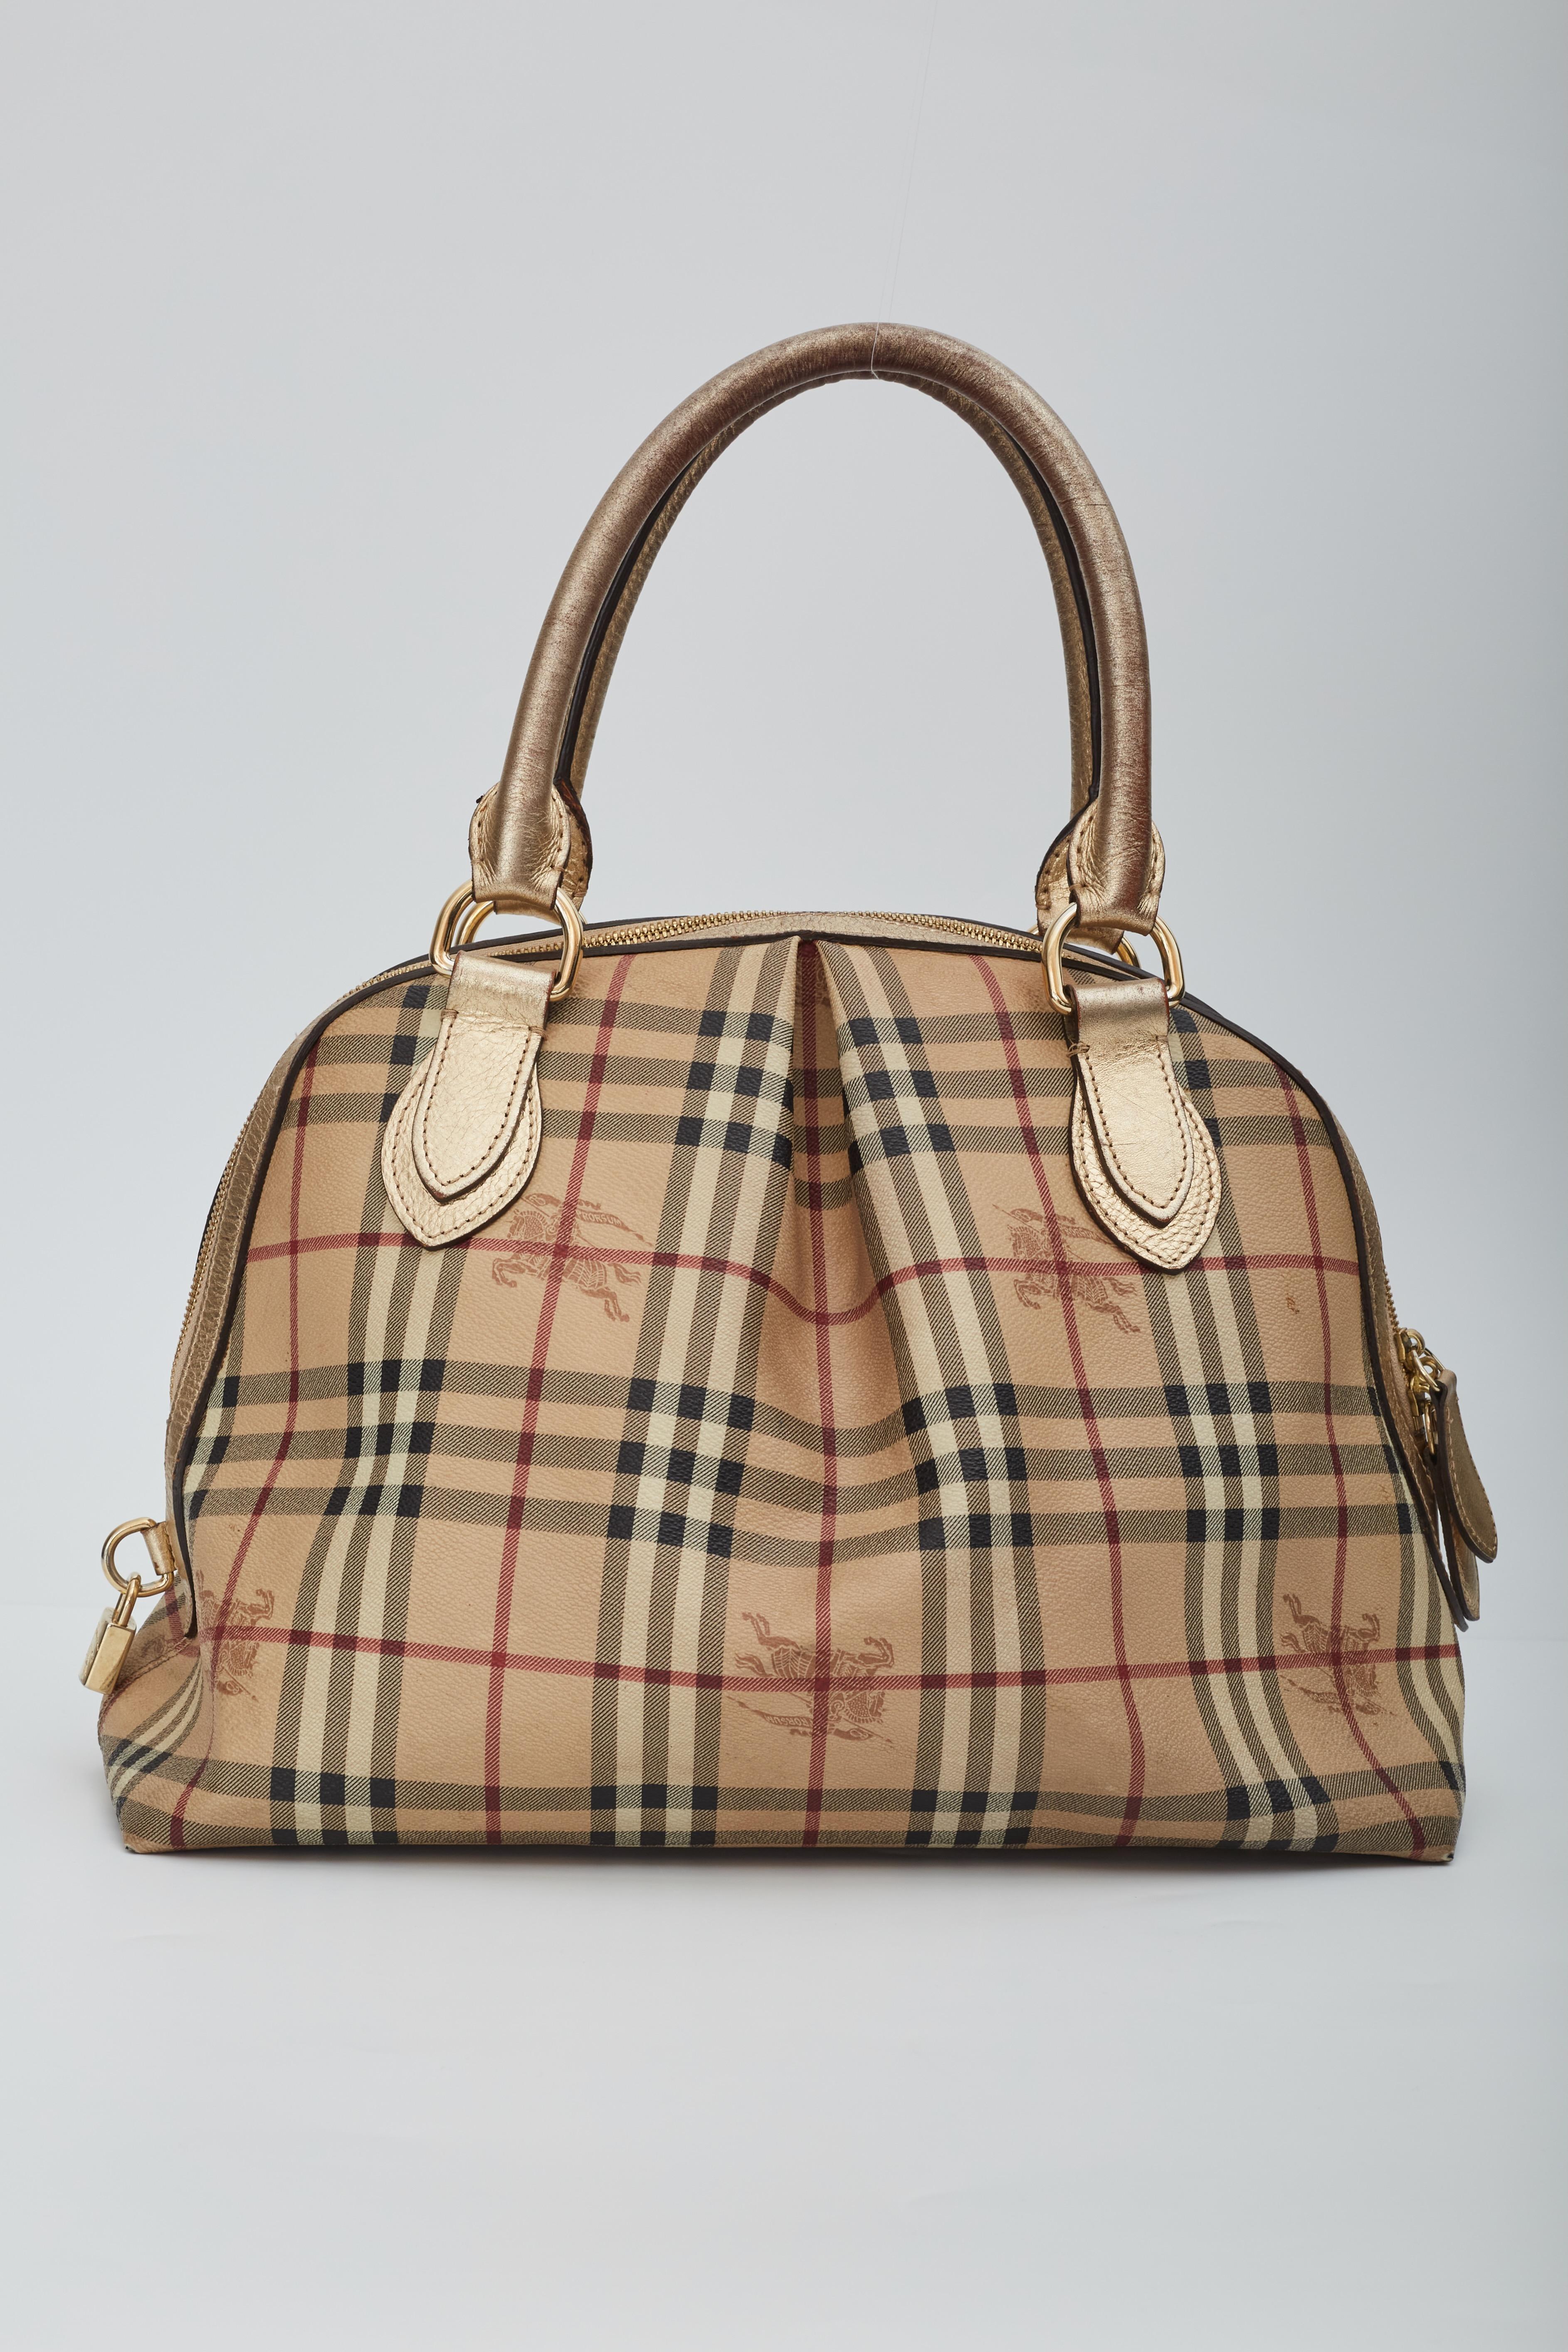 Burberry Top Handle Bag. Haymarket Check Pattern. Gold-Tone Hardware. Leather Trim. Coated Canvas Exterior. Dual Rolled Leather top Handles. Leather Trim Embellishment. Canvas Lining & Three Interior Pockets. Zip Closure at Top. Protective Feet at